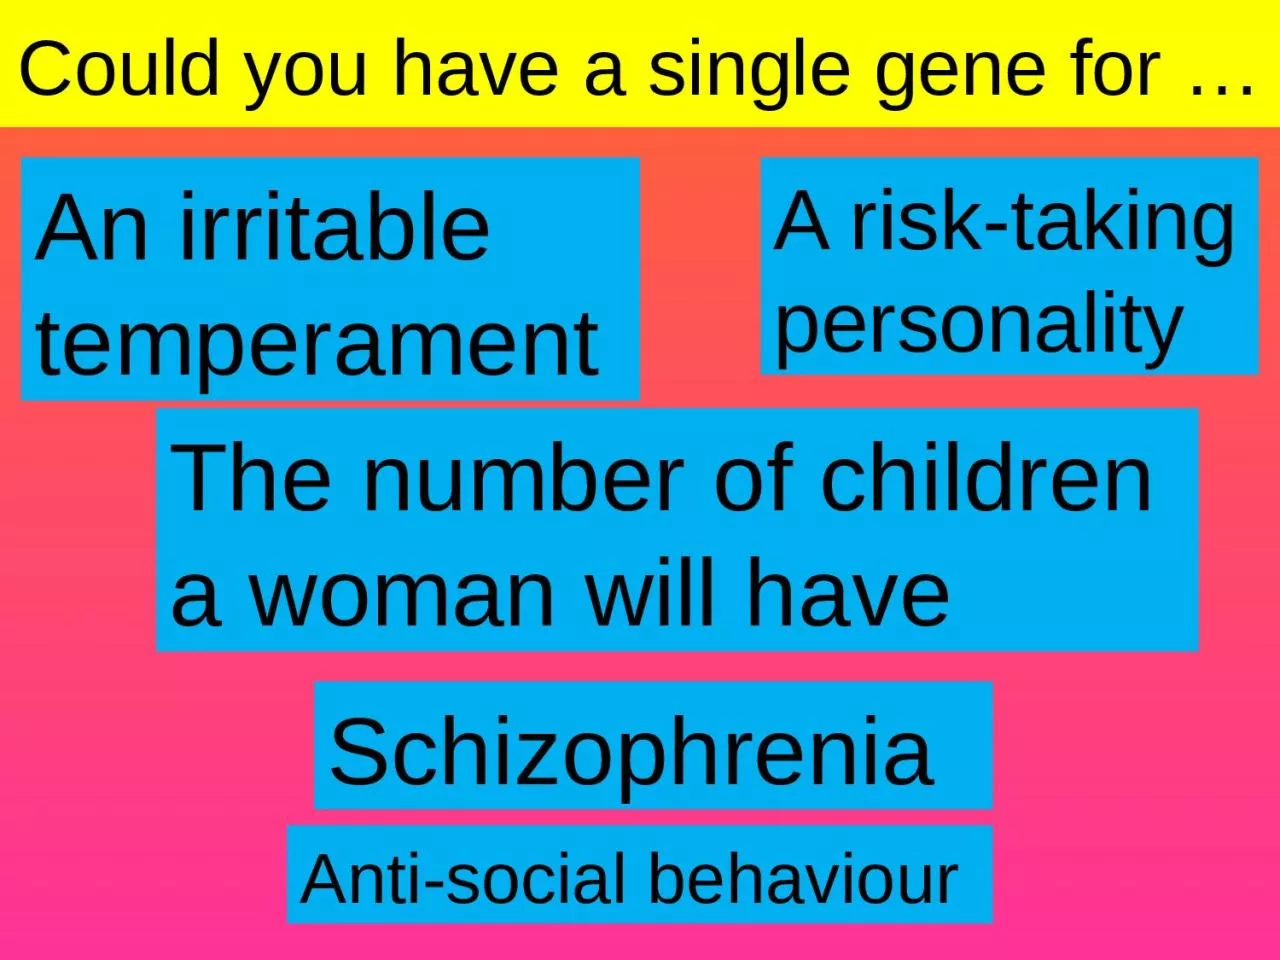 Could you have a single gene for …